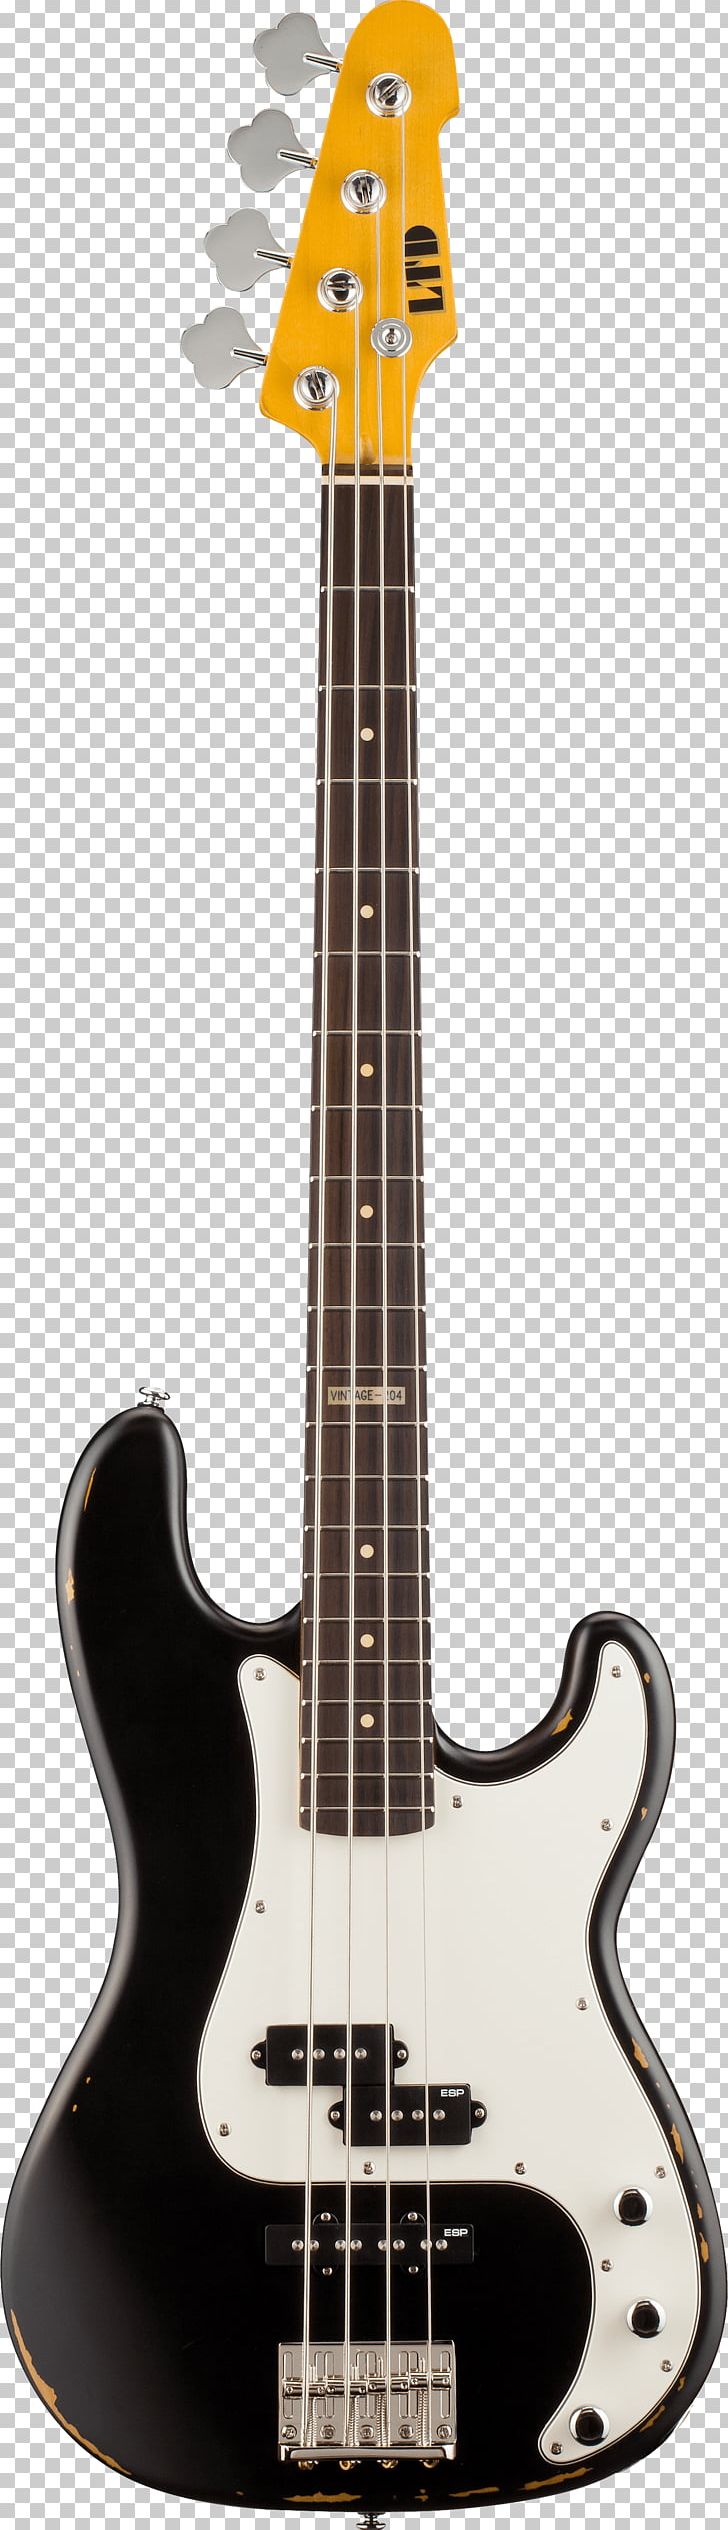 Fender Precision Bass Fender Stratocaster Fender Telecaster Fender Mustang Bass Bass Guitar PNG, Clipart, Guitar Accessory, Interior Architecture, Jazz Guitarist, Music, Musical Instrument Free PNG Download